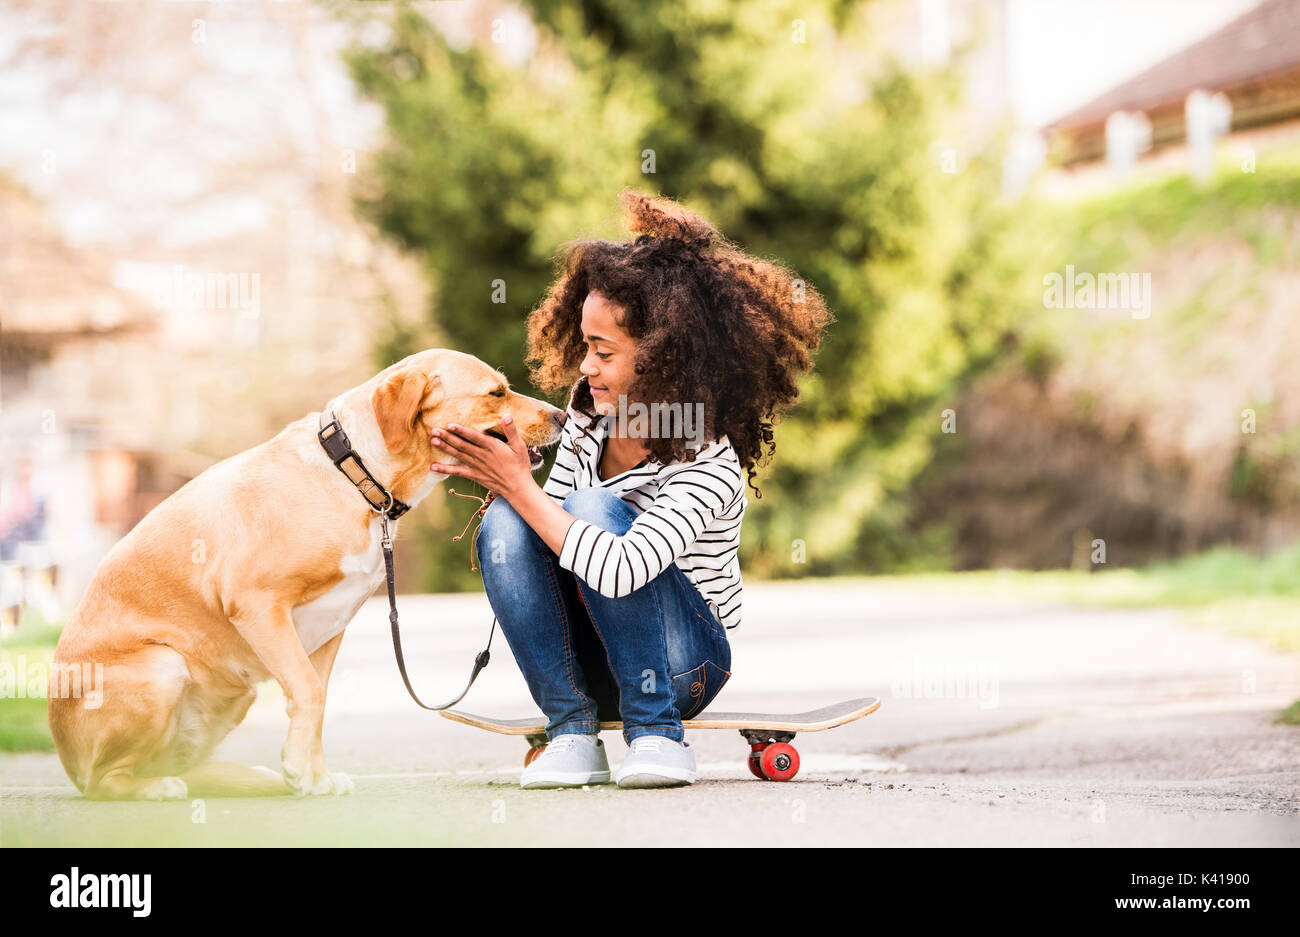 African american girl outdoors on skateboard with her dog. Stock Photo